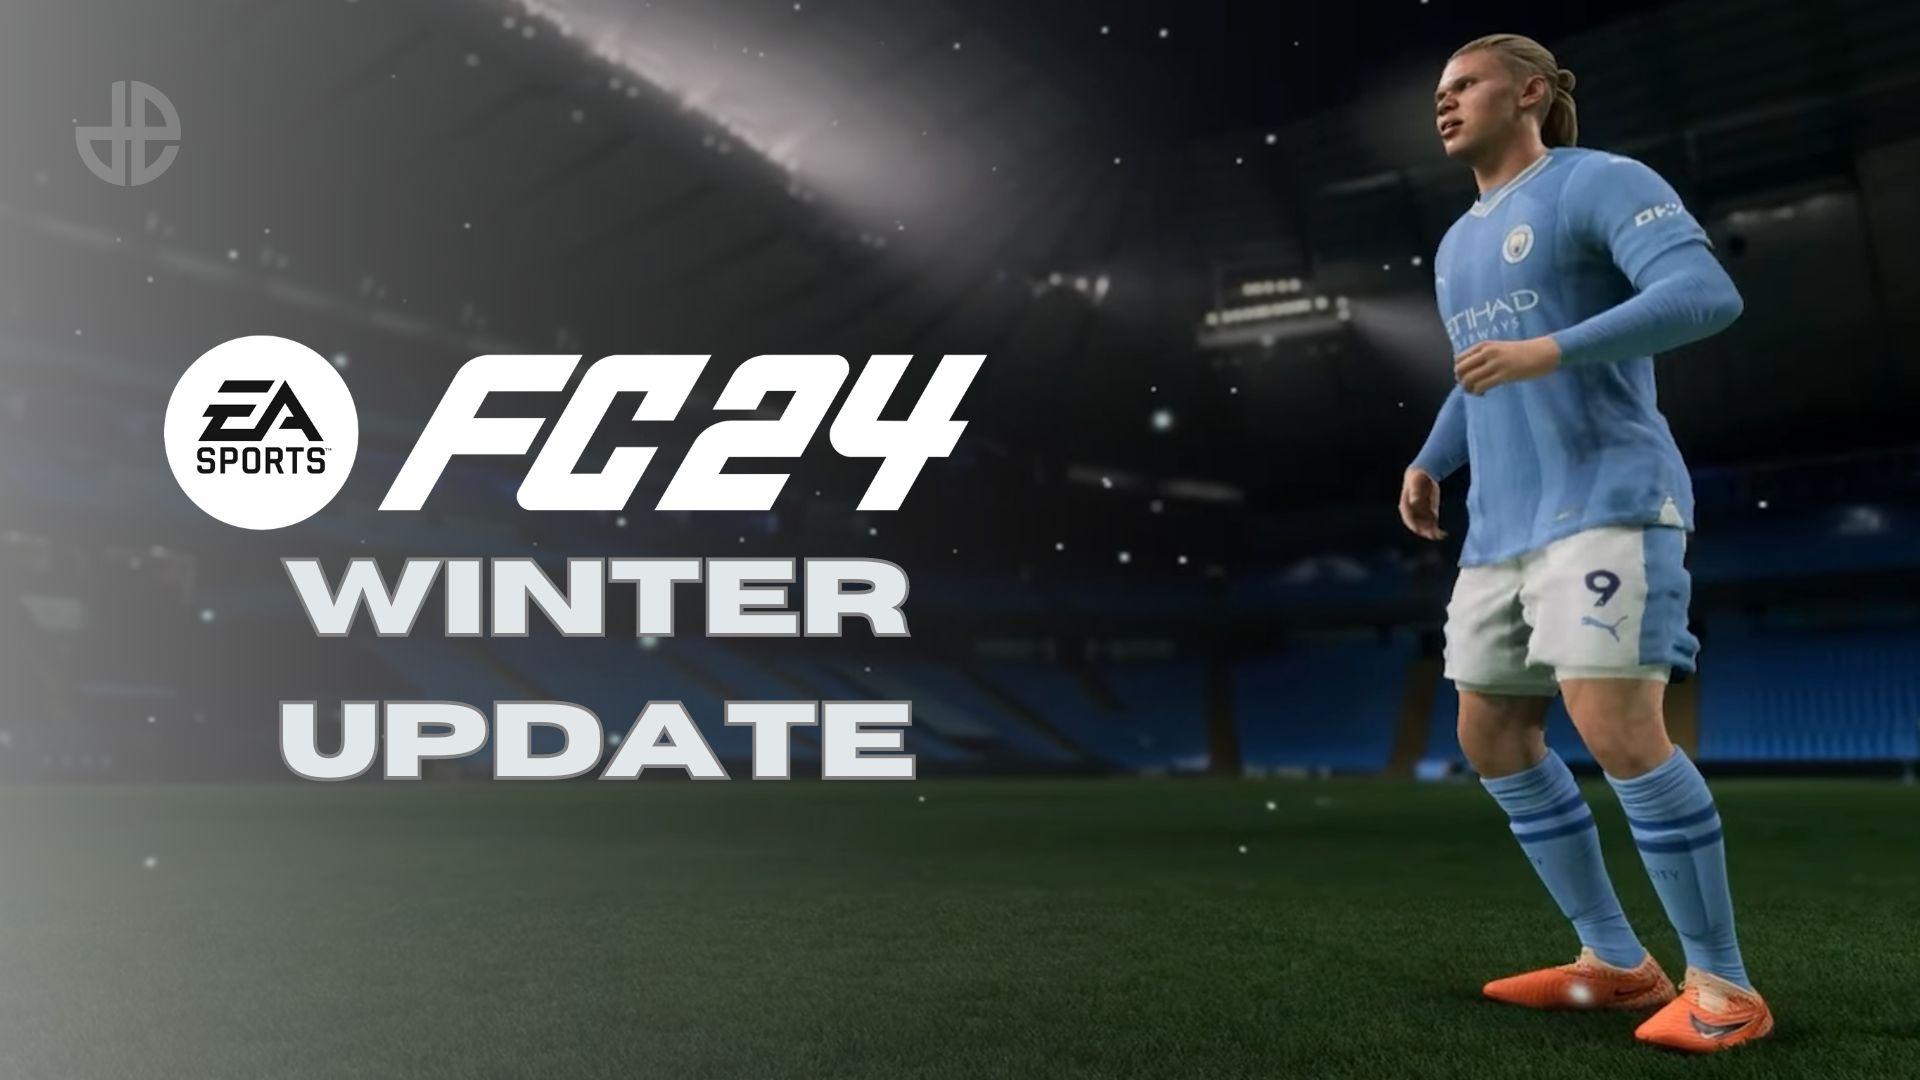 Erling Haaland running in snow next to EA SPORTS FC text and logo